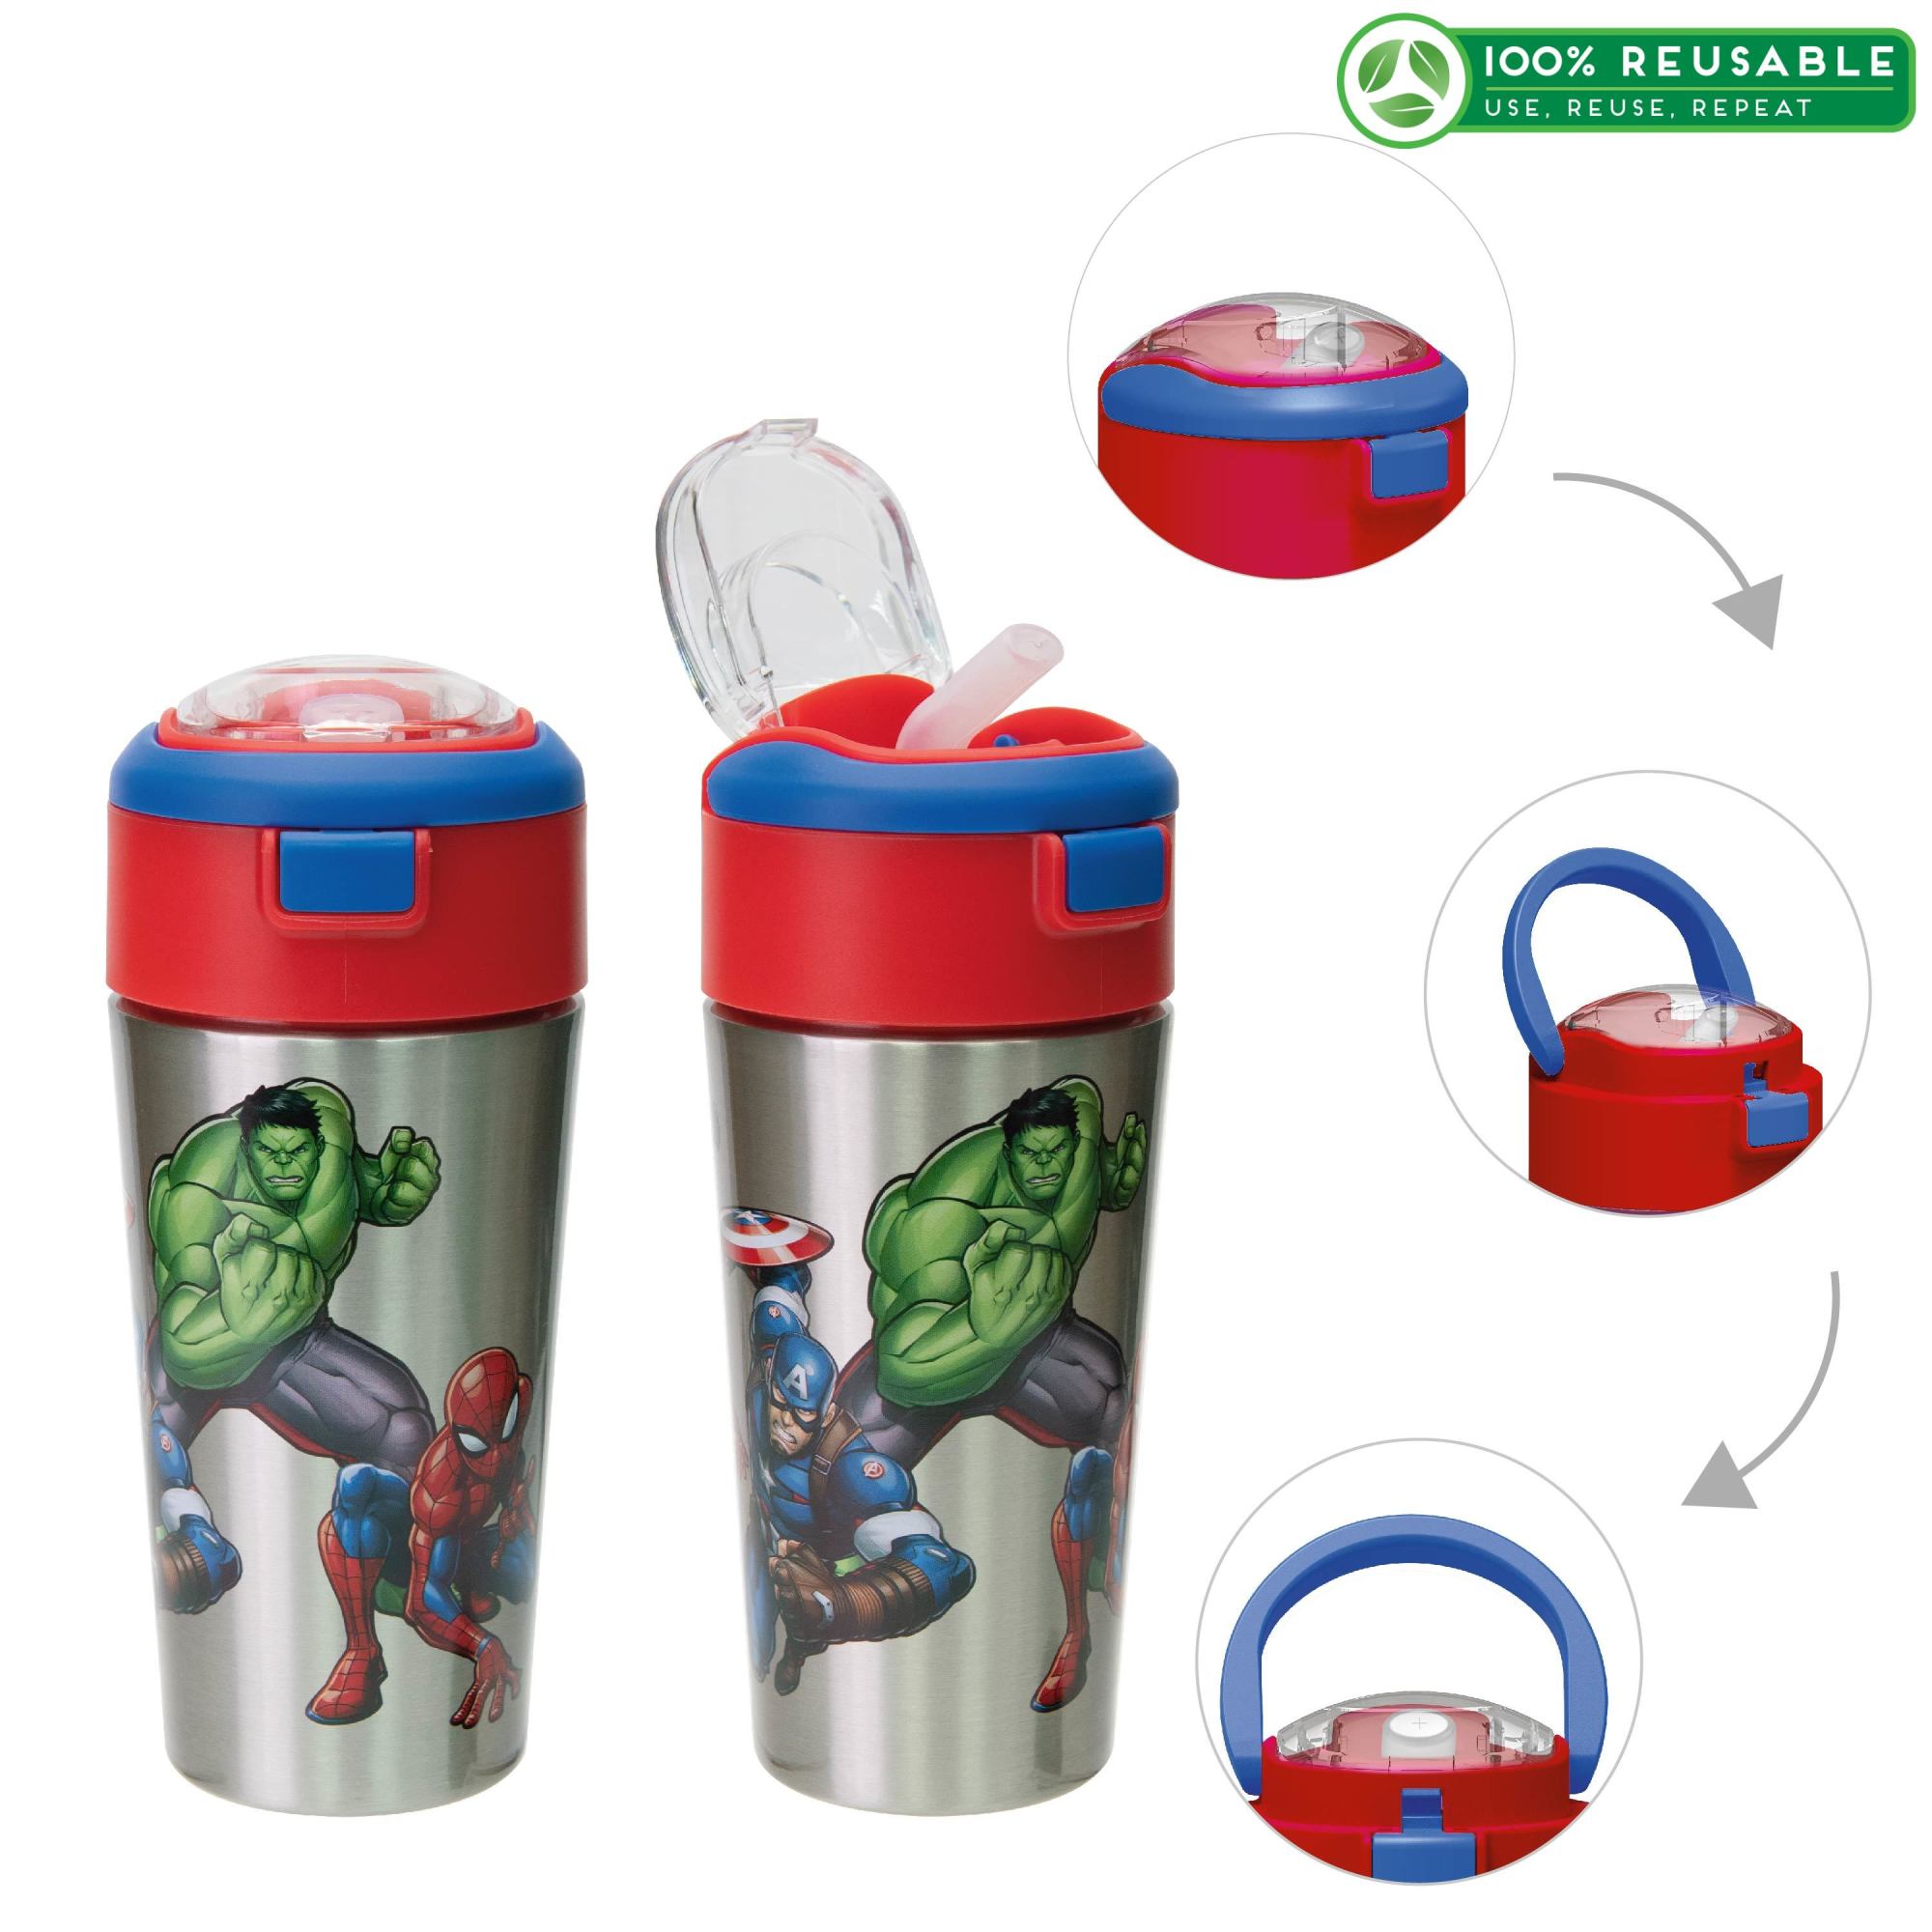 Marvel Comics 12 ounce Vacuum Insulated Reusable Stainless Steel Water Bottle, Spider-Man, Ironman & The Hulk slideshow image 1